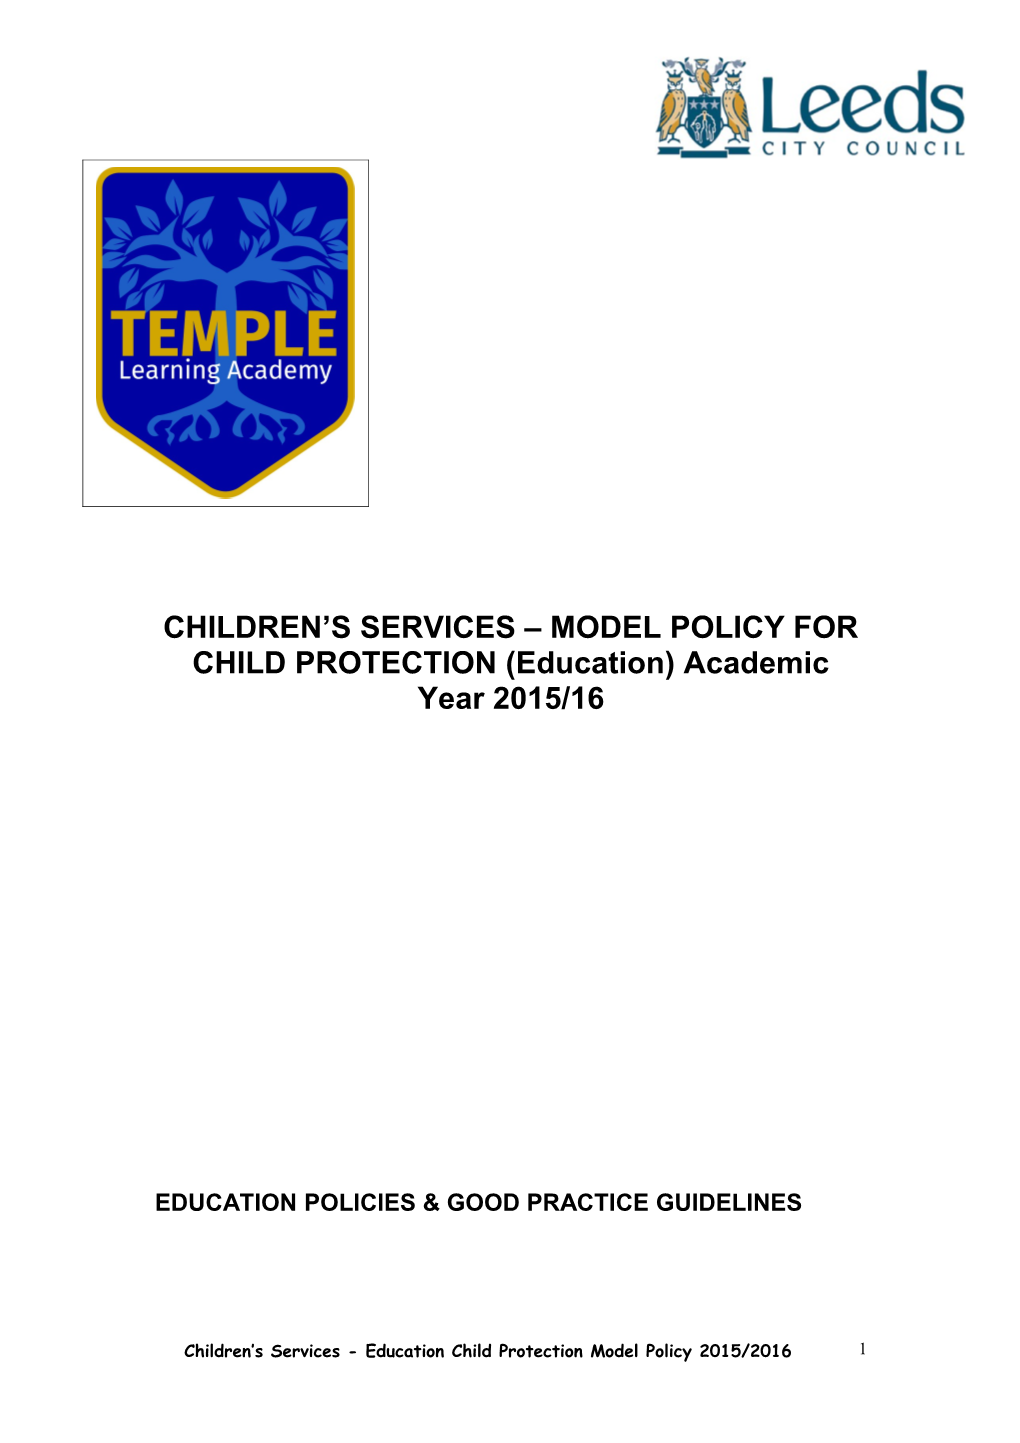 CHILDREN S SERVICES MODEL POLICY for CHILD PROTECTION (Education) Academic Year 2015/16